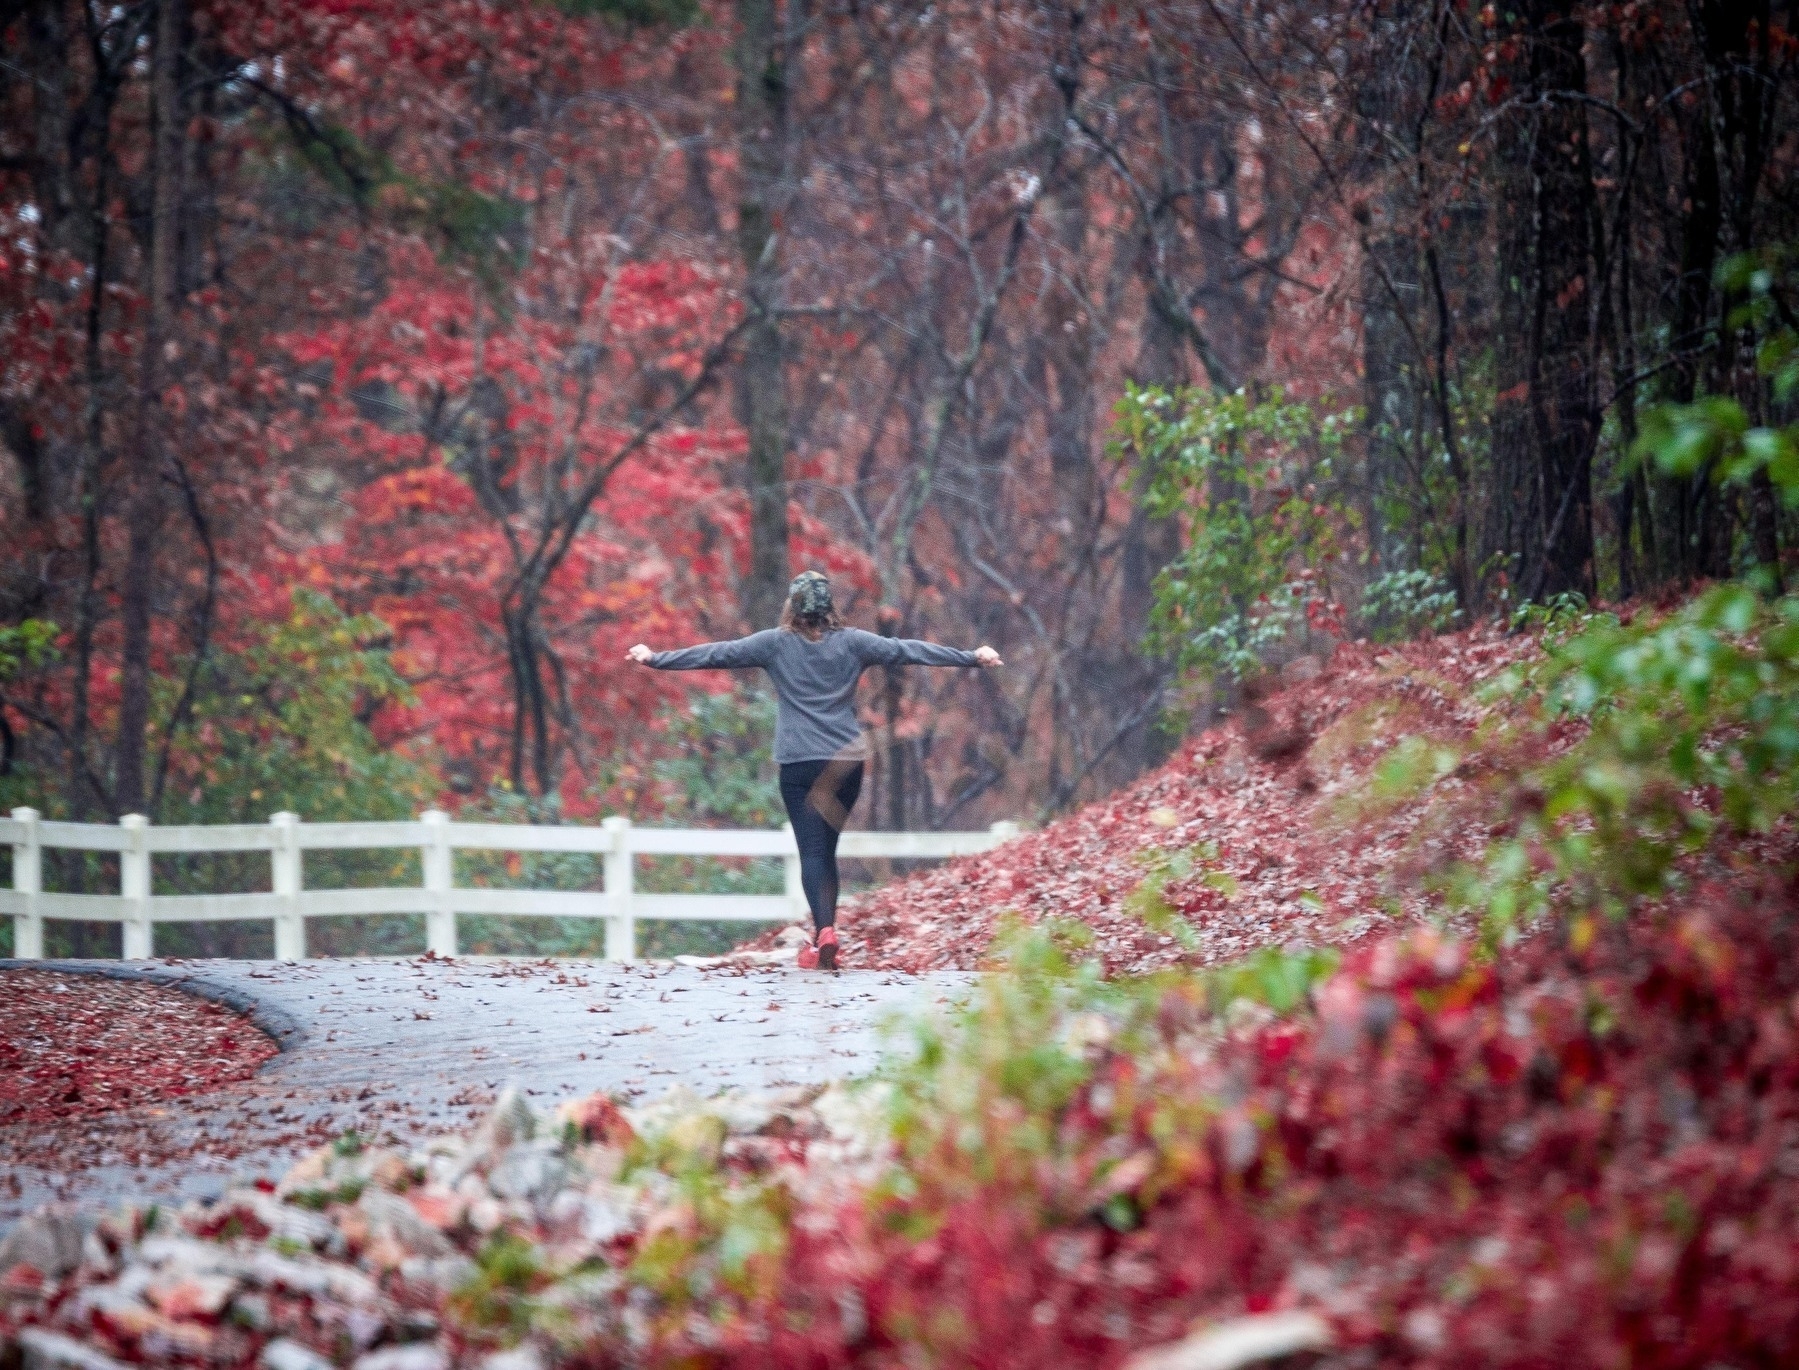 A woman with arms extended walks along an asphalt path in woods with autumnal colors.